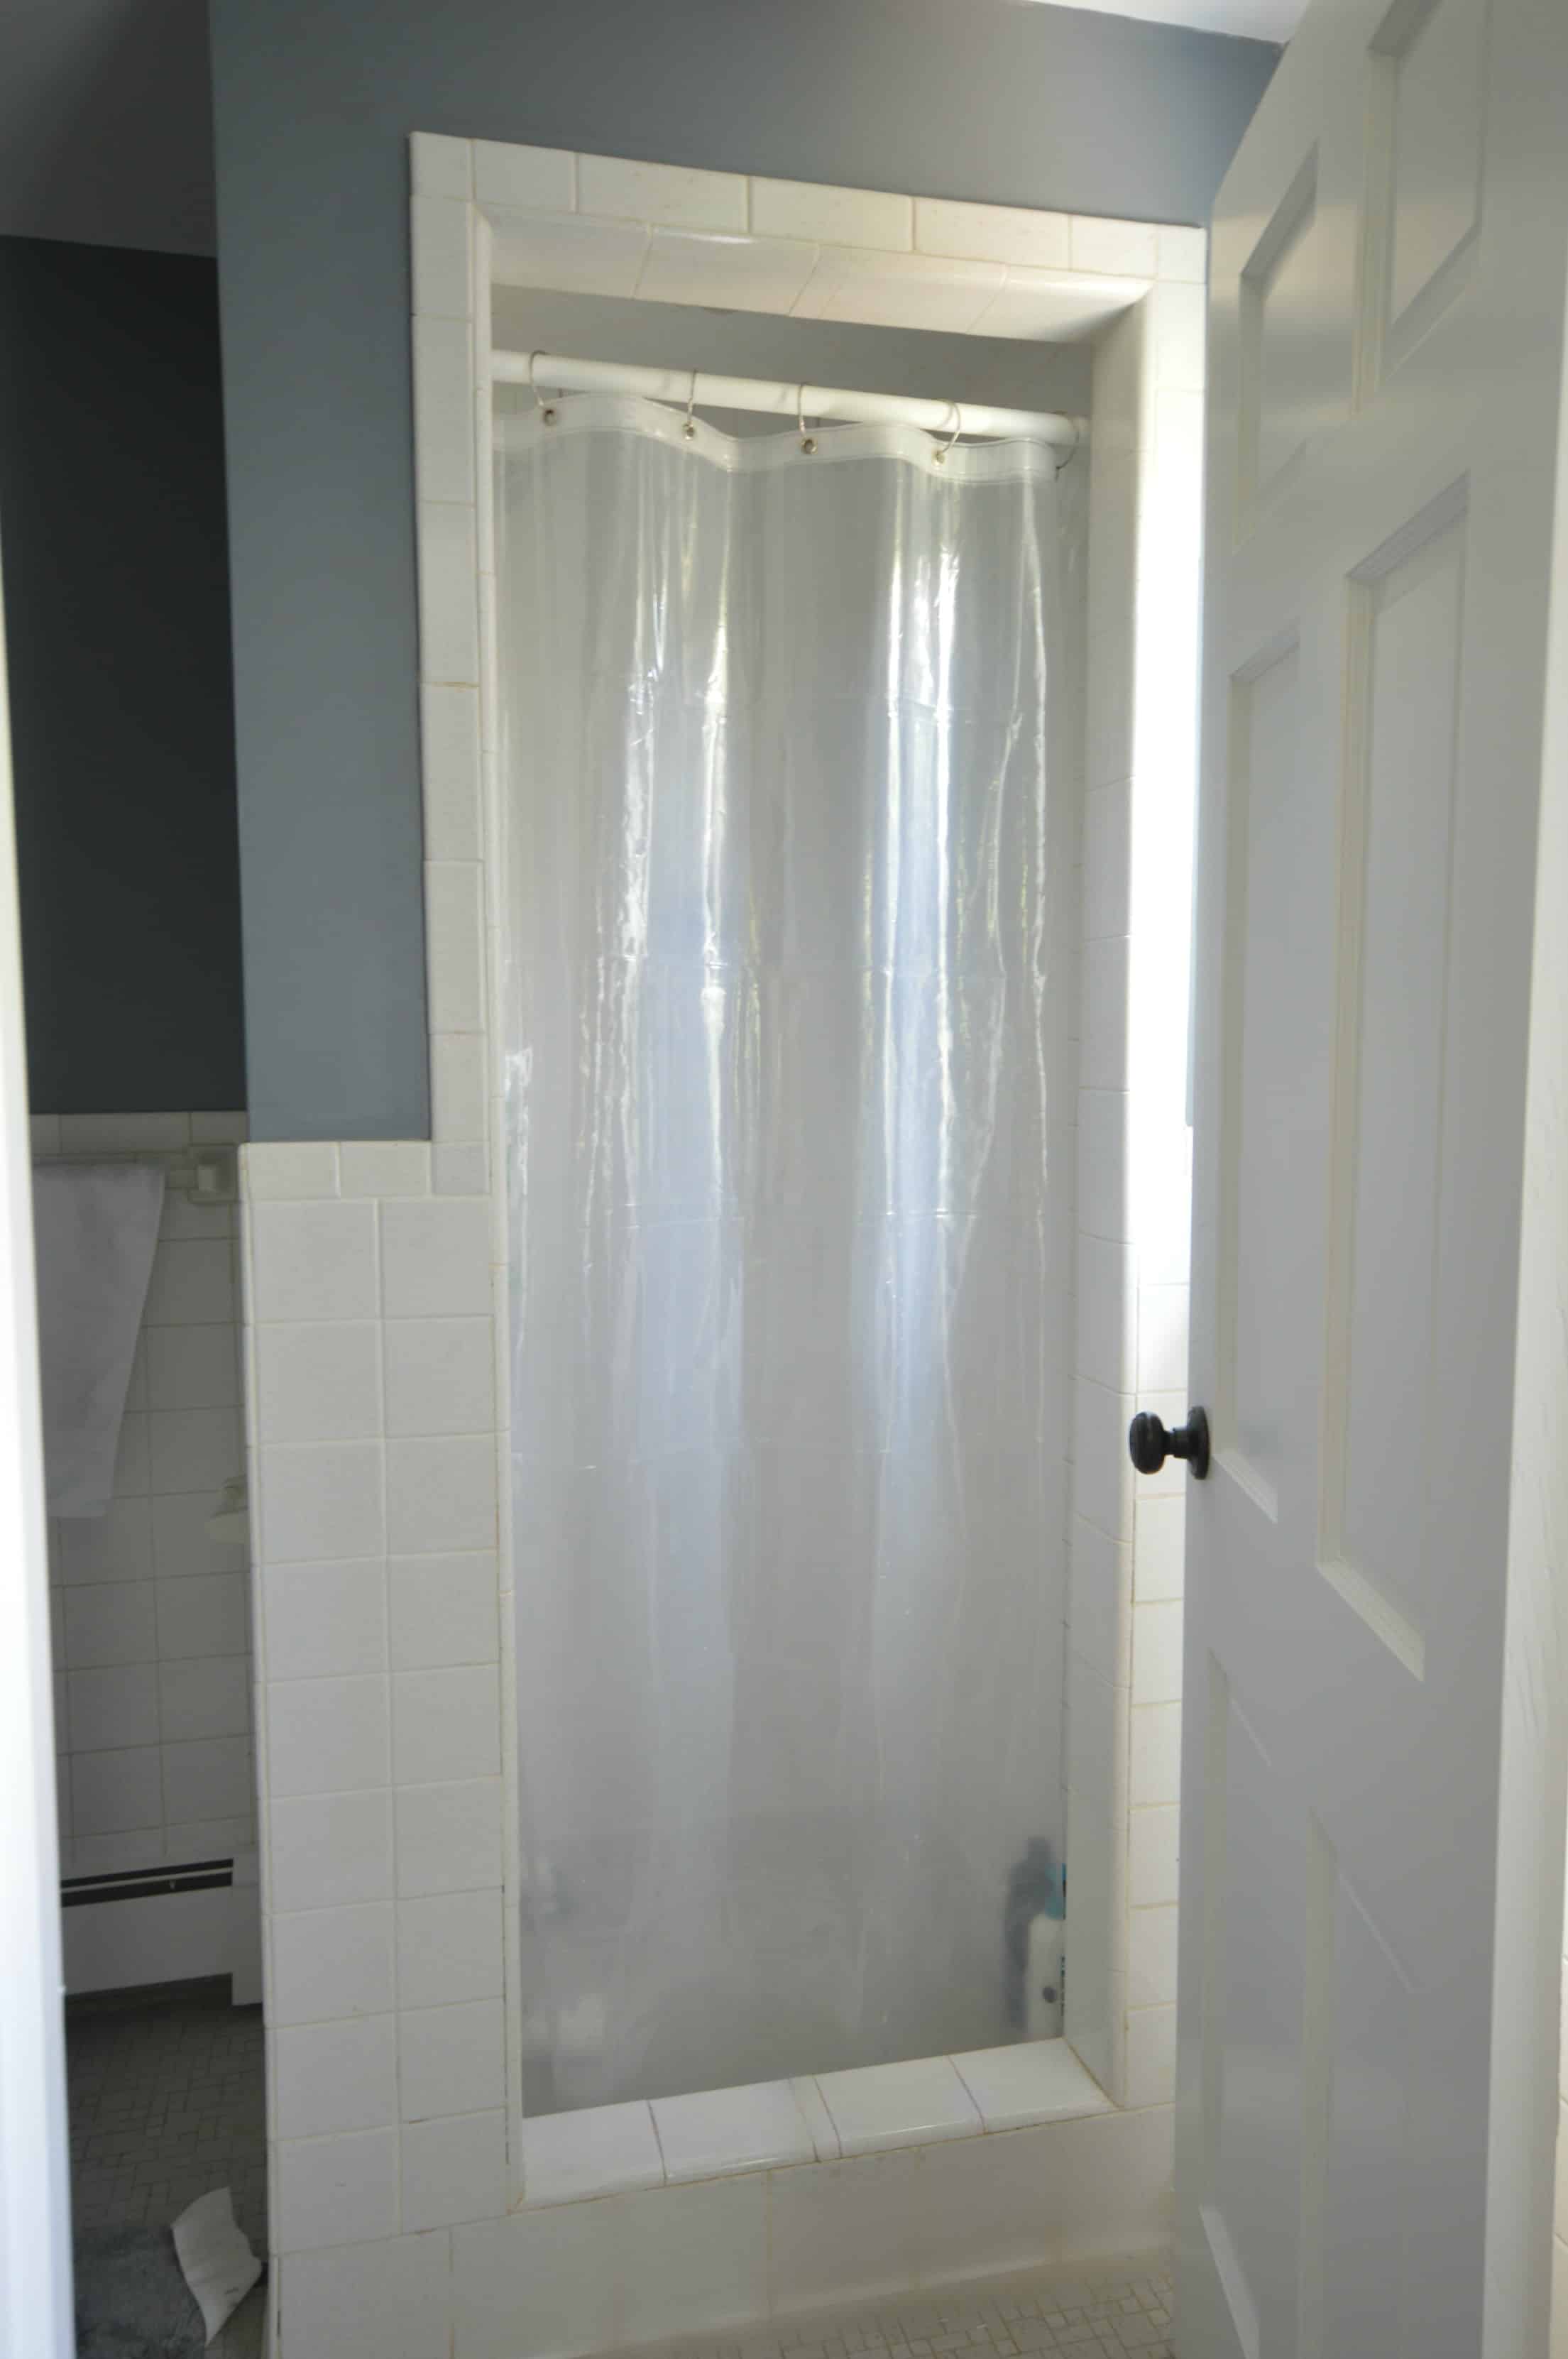 A stand-up shower with a clear, plastic shower curtain